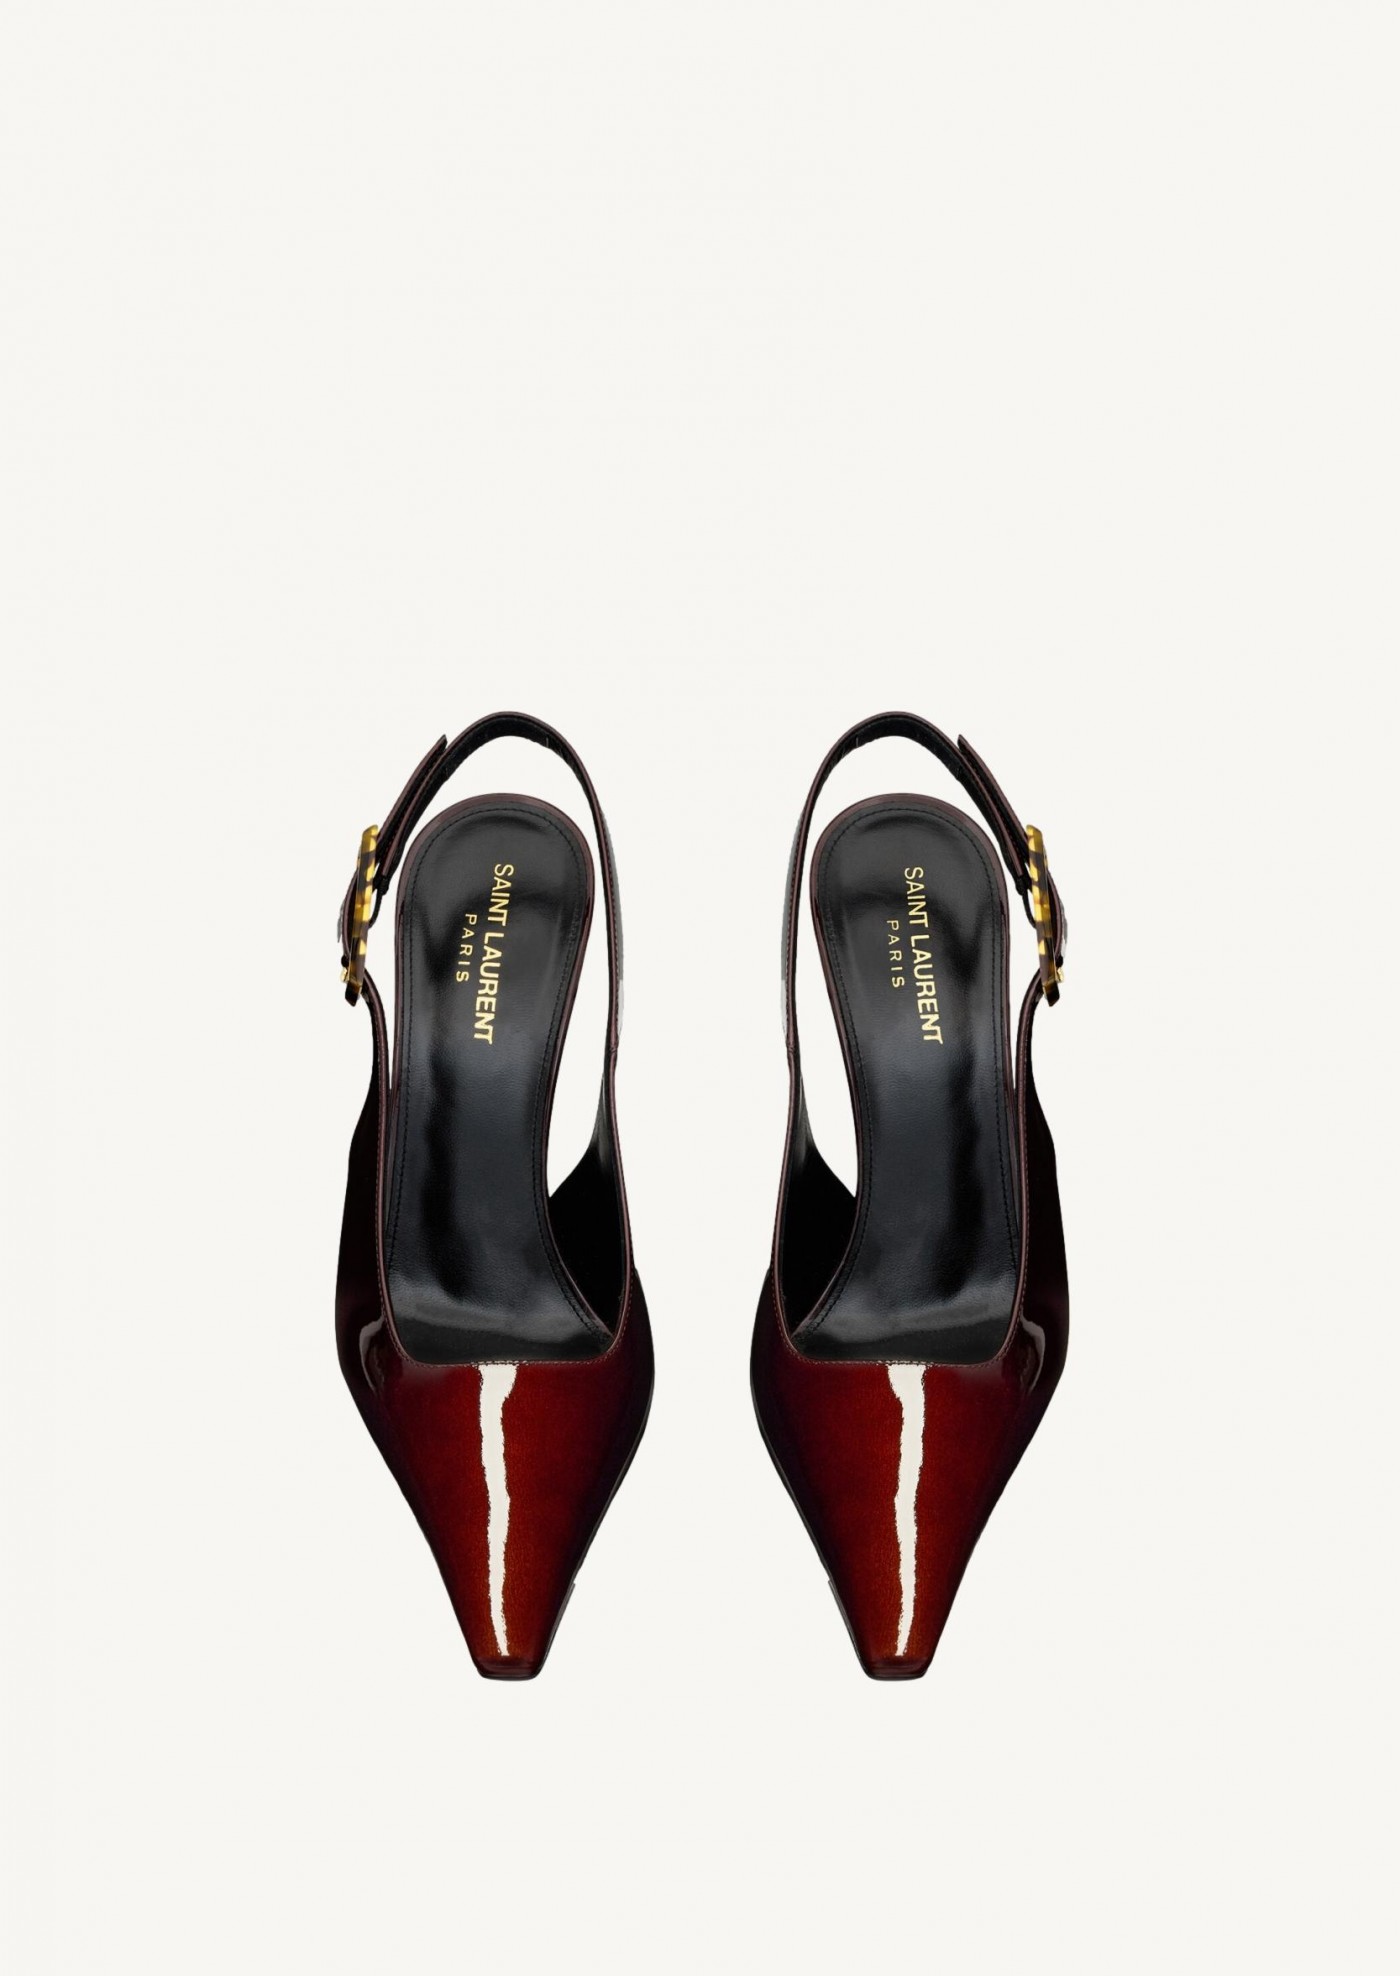 Dune slingbacks in glacé brown patent leather